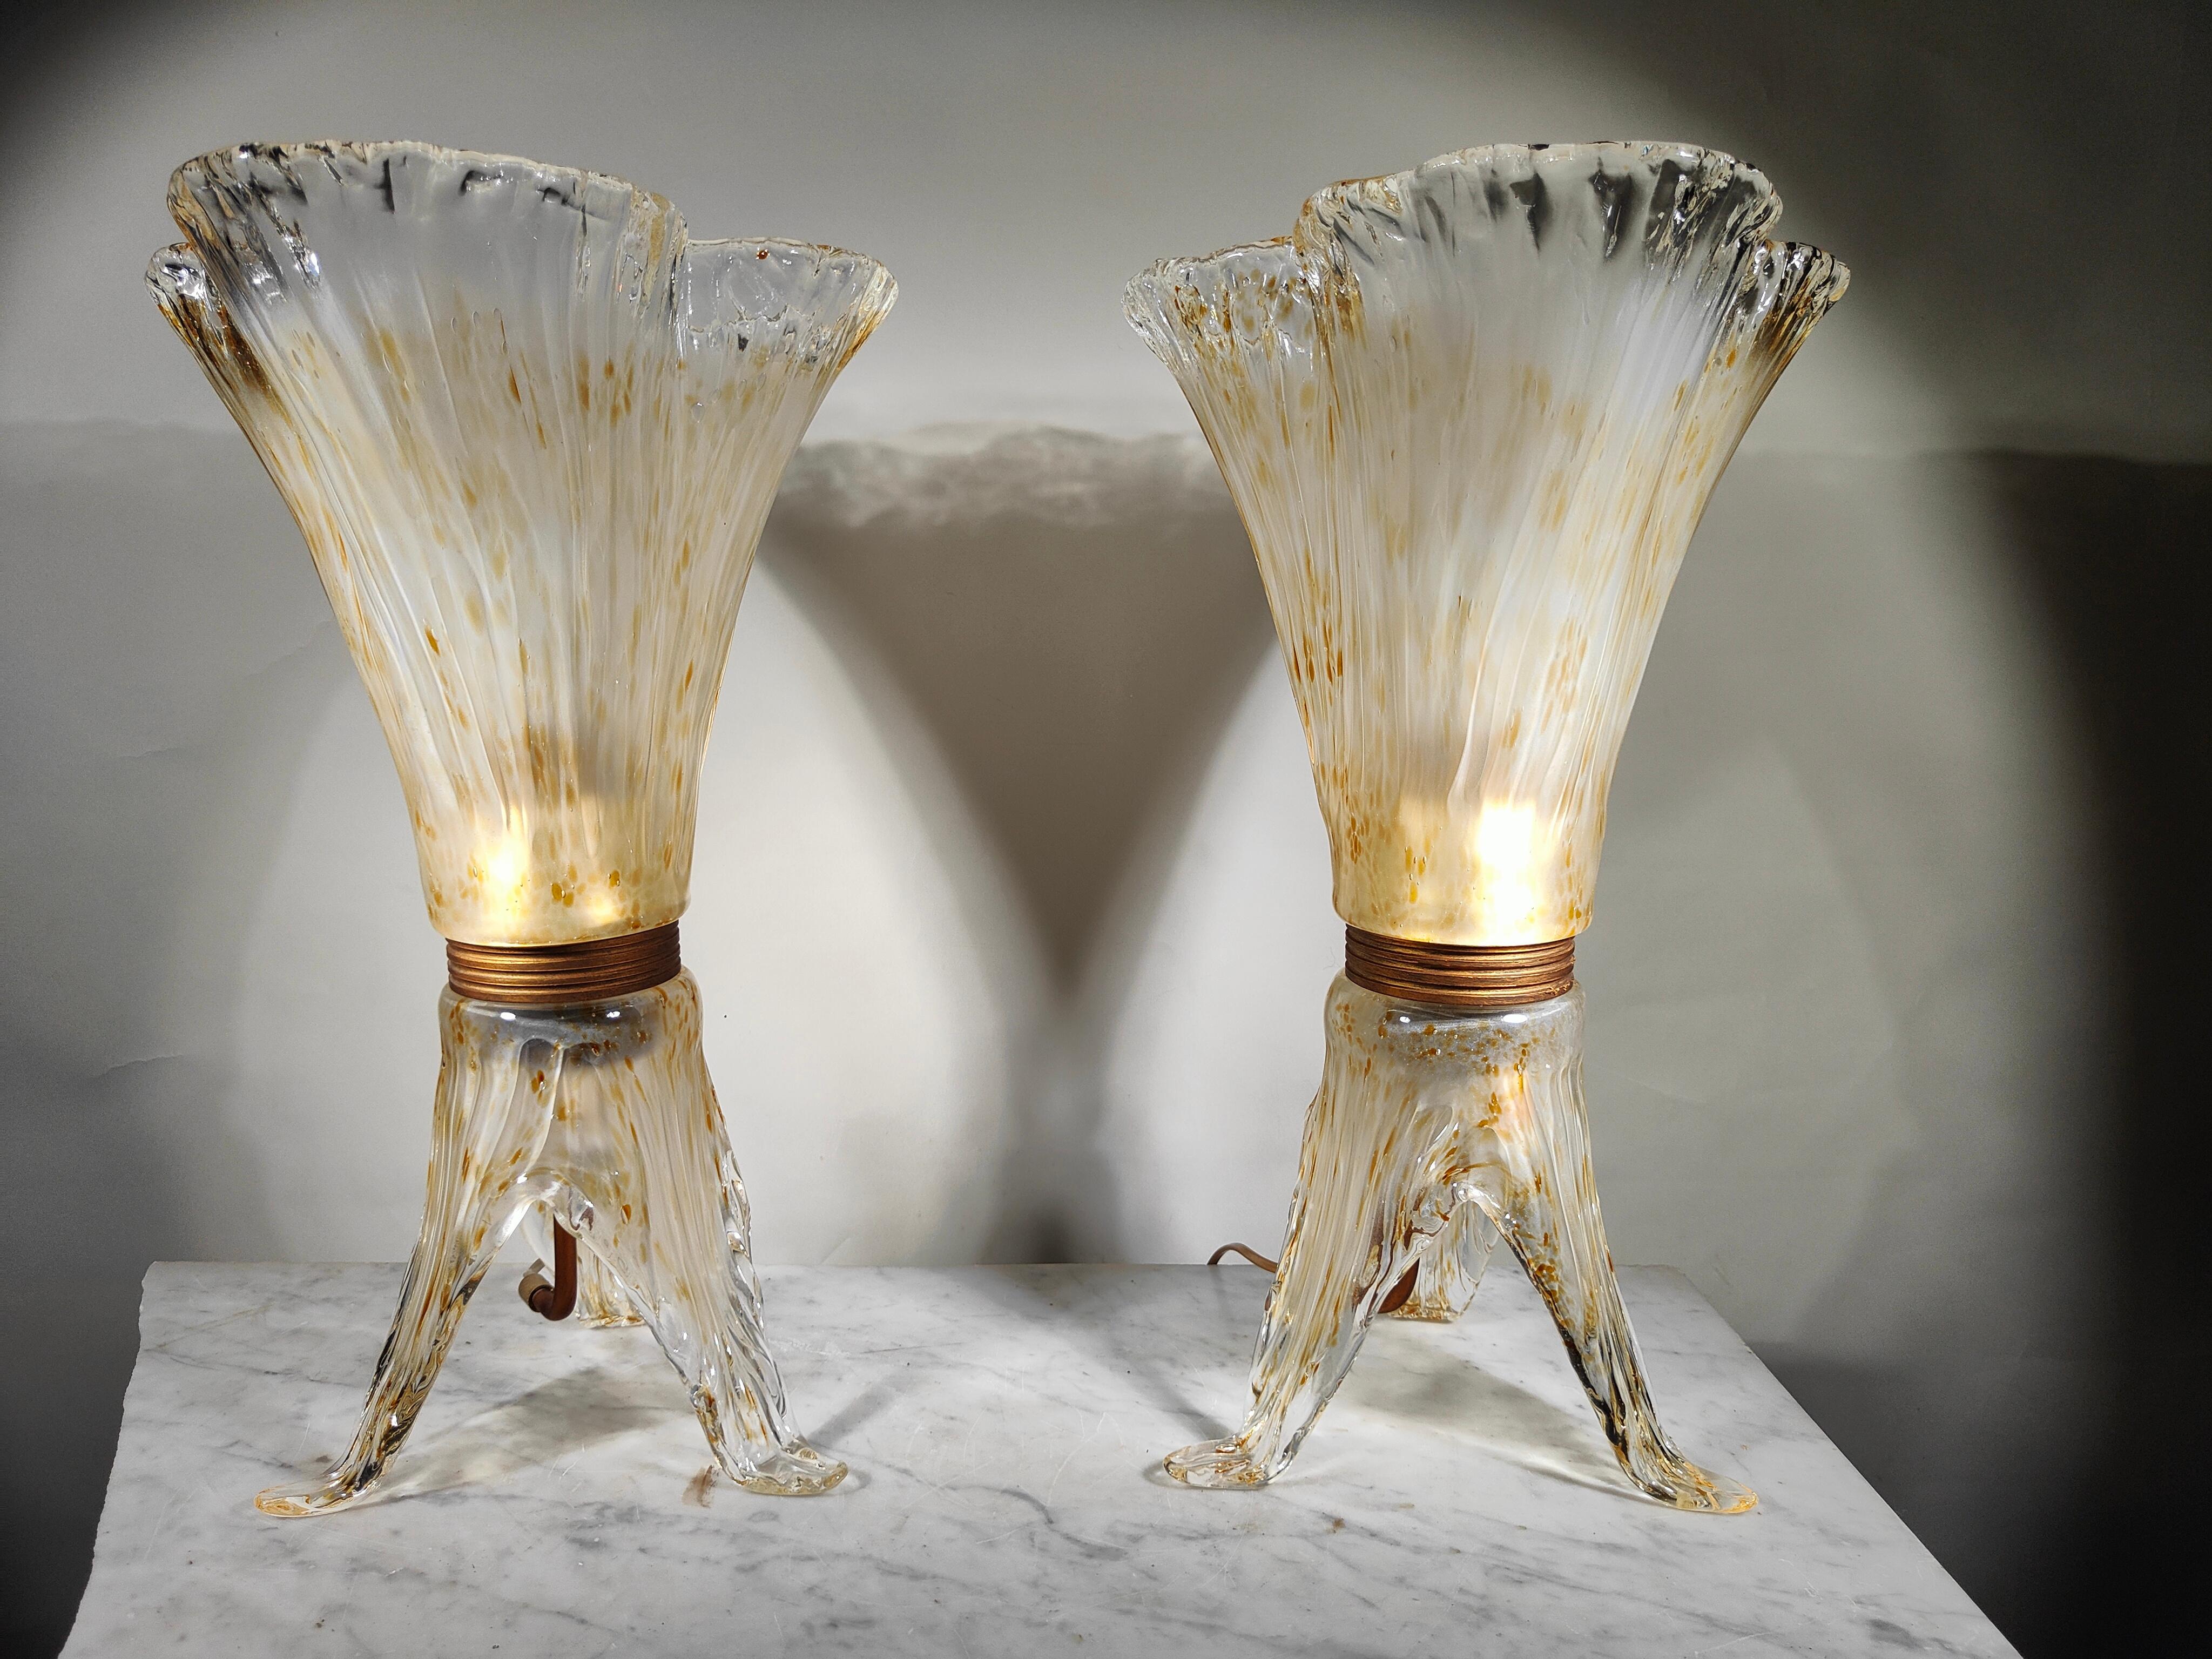 Elegant Pair of Murano Glass Table Lamps - 1970s For Sale 13